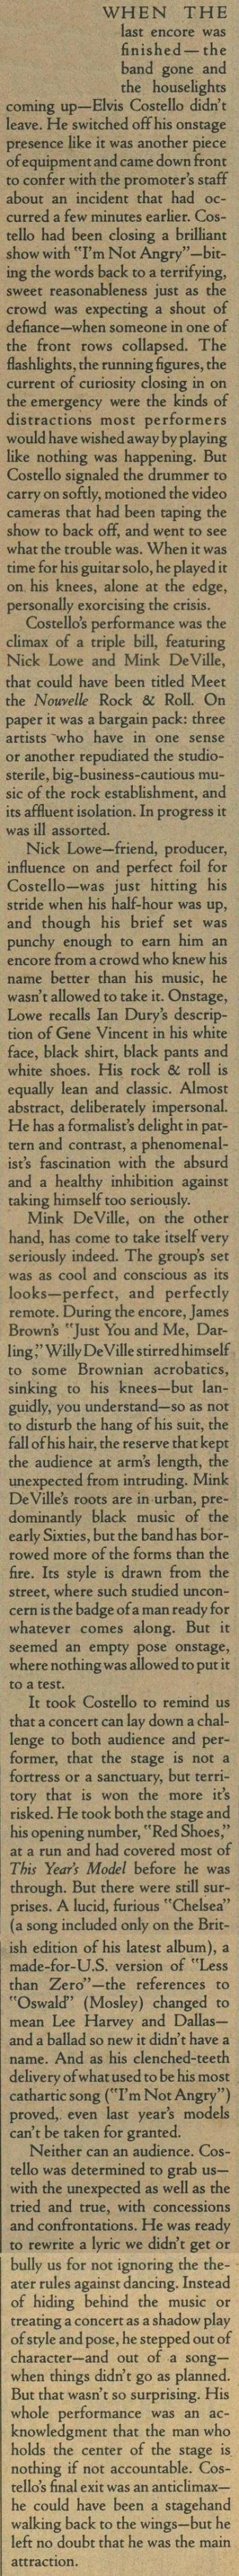 1978-06-29 Rolling Stone page 68 composite.jpg